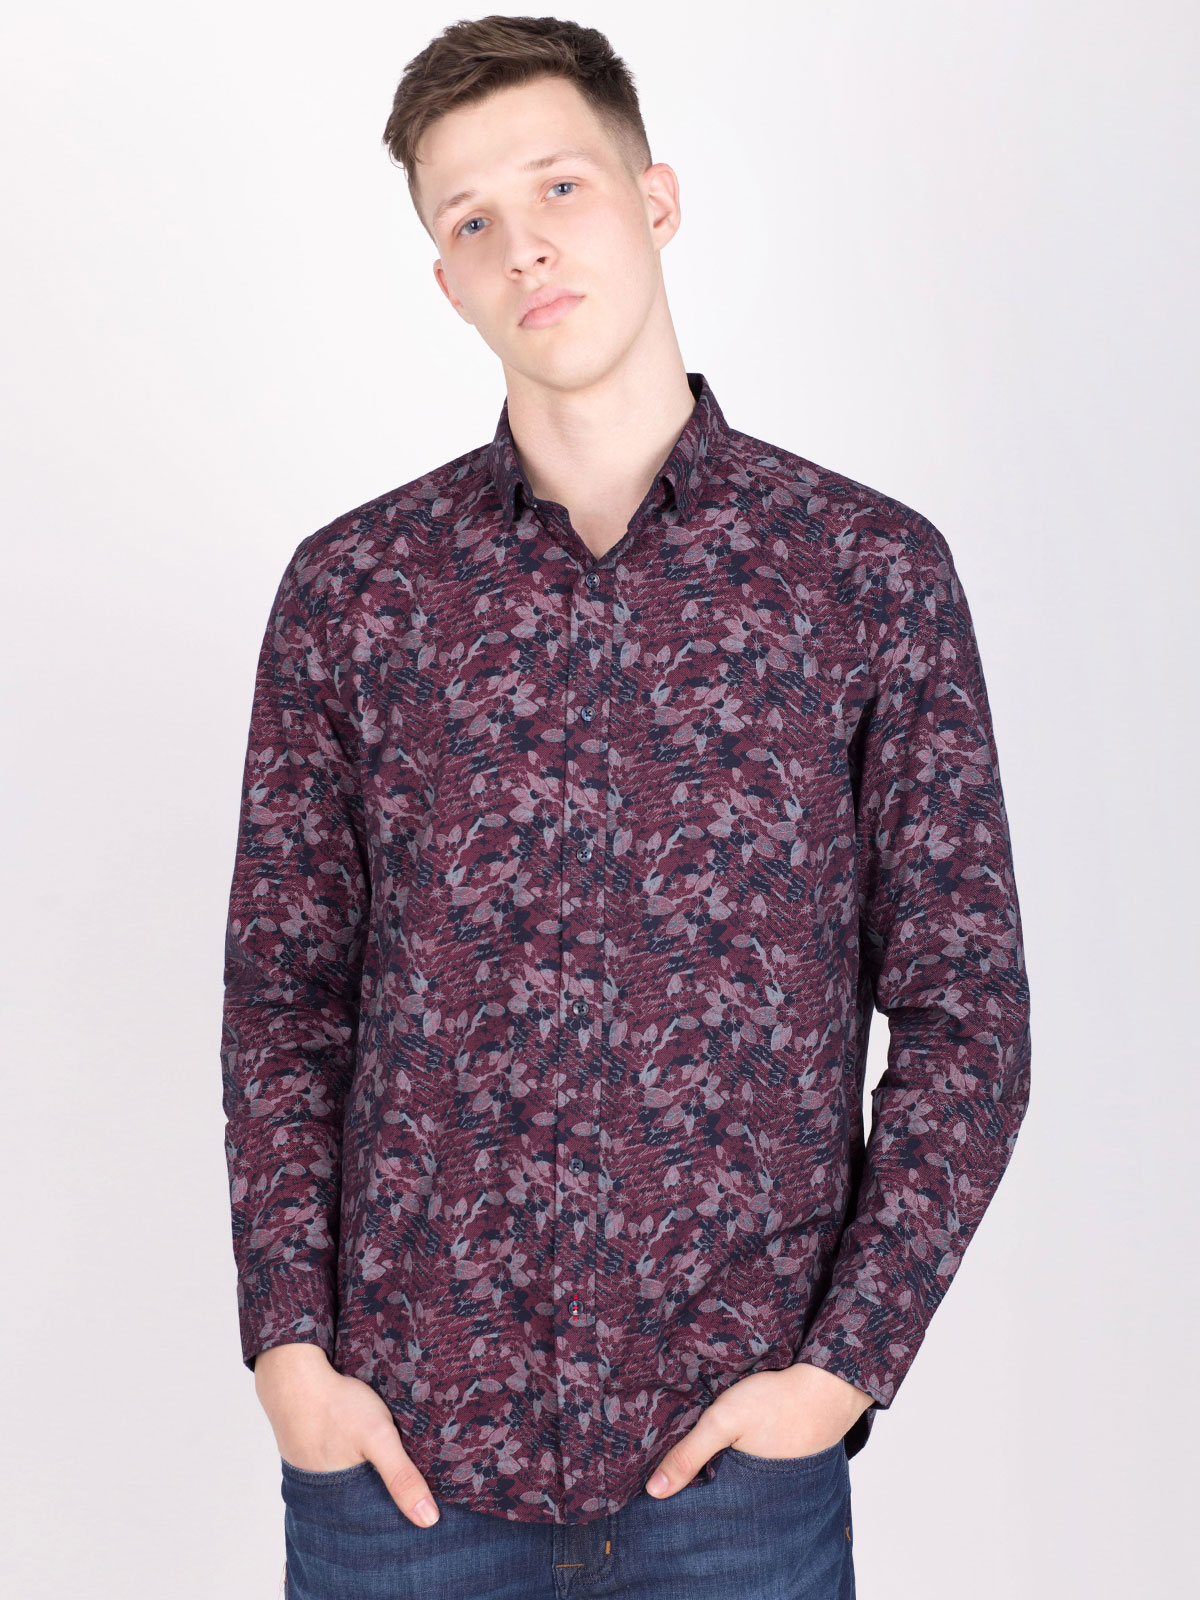 Shirt in burgundy with flowers - 21469 € 16.31 img3